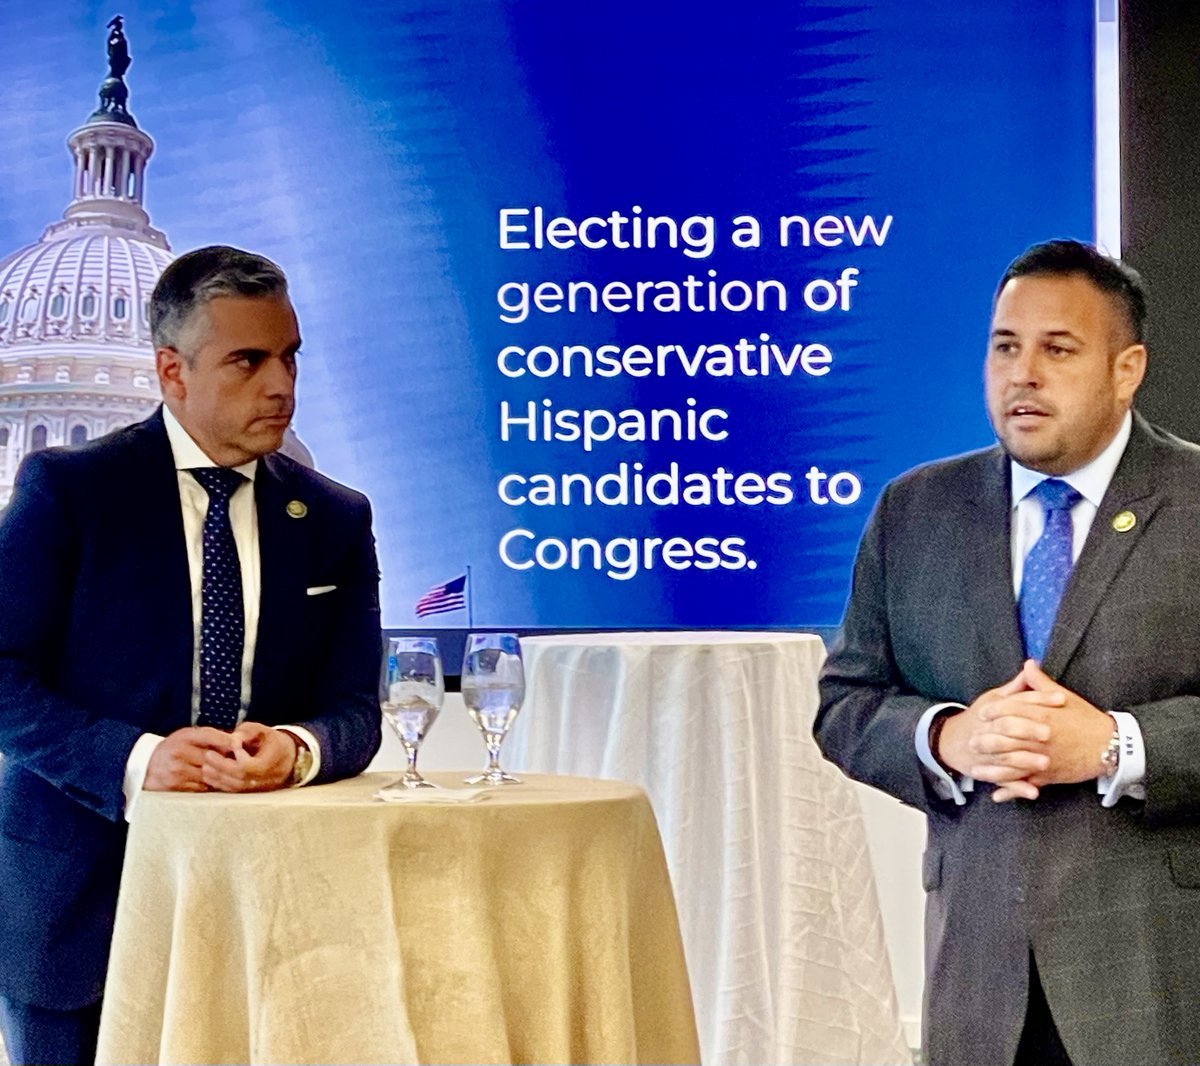 #TeamBeckerDC enjoyed an evening of meaningful connections and fruitful collaborations with our client National Association of Broadcasters at the Hispanic Leadership Trust event. Pictured are Congressman Juan Ciscomani and Congressman Anthony D'Esposito. #Networking #Becker